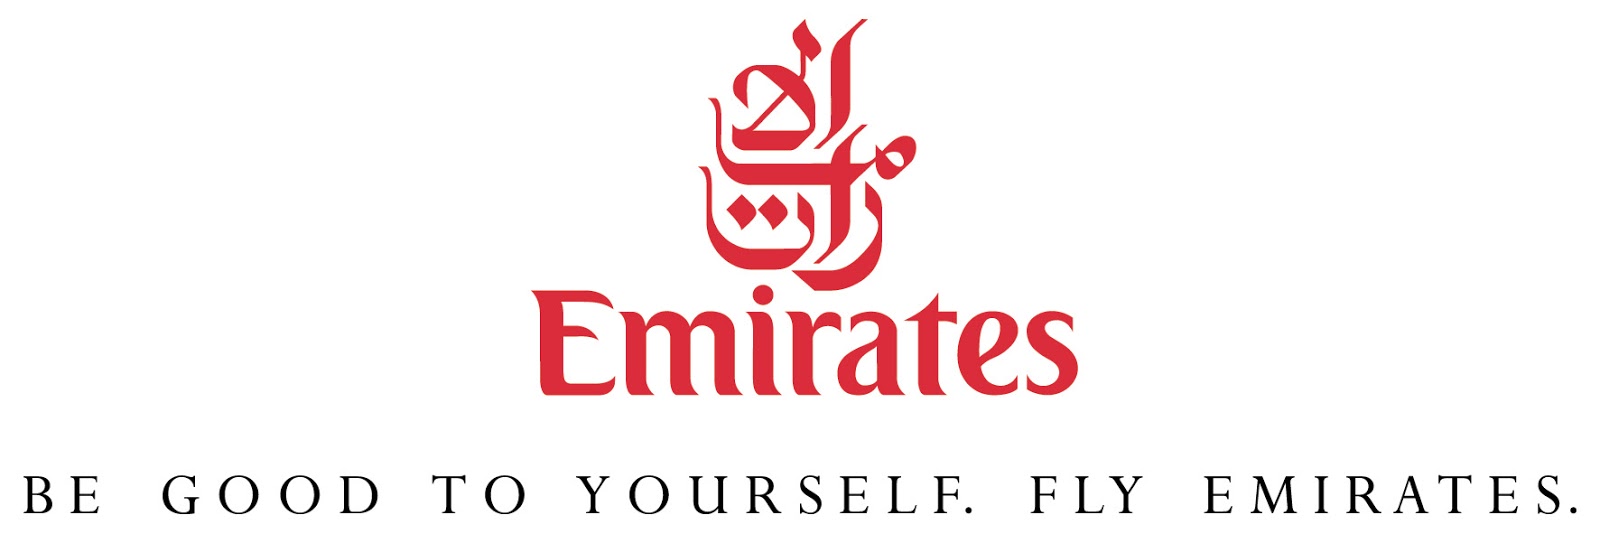 Perth Airport Spotter's Blog: Emirates Extra capacity flight to Middle East